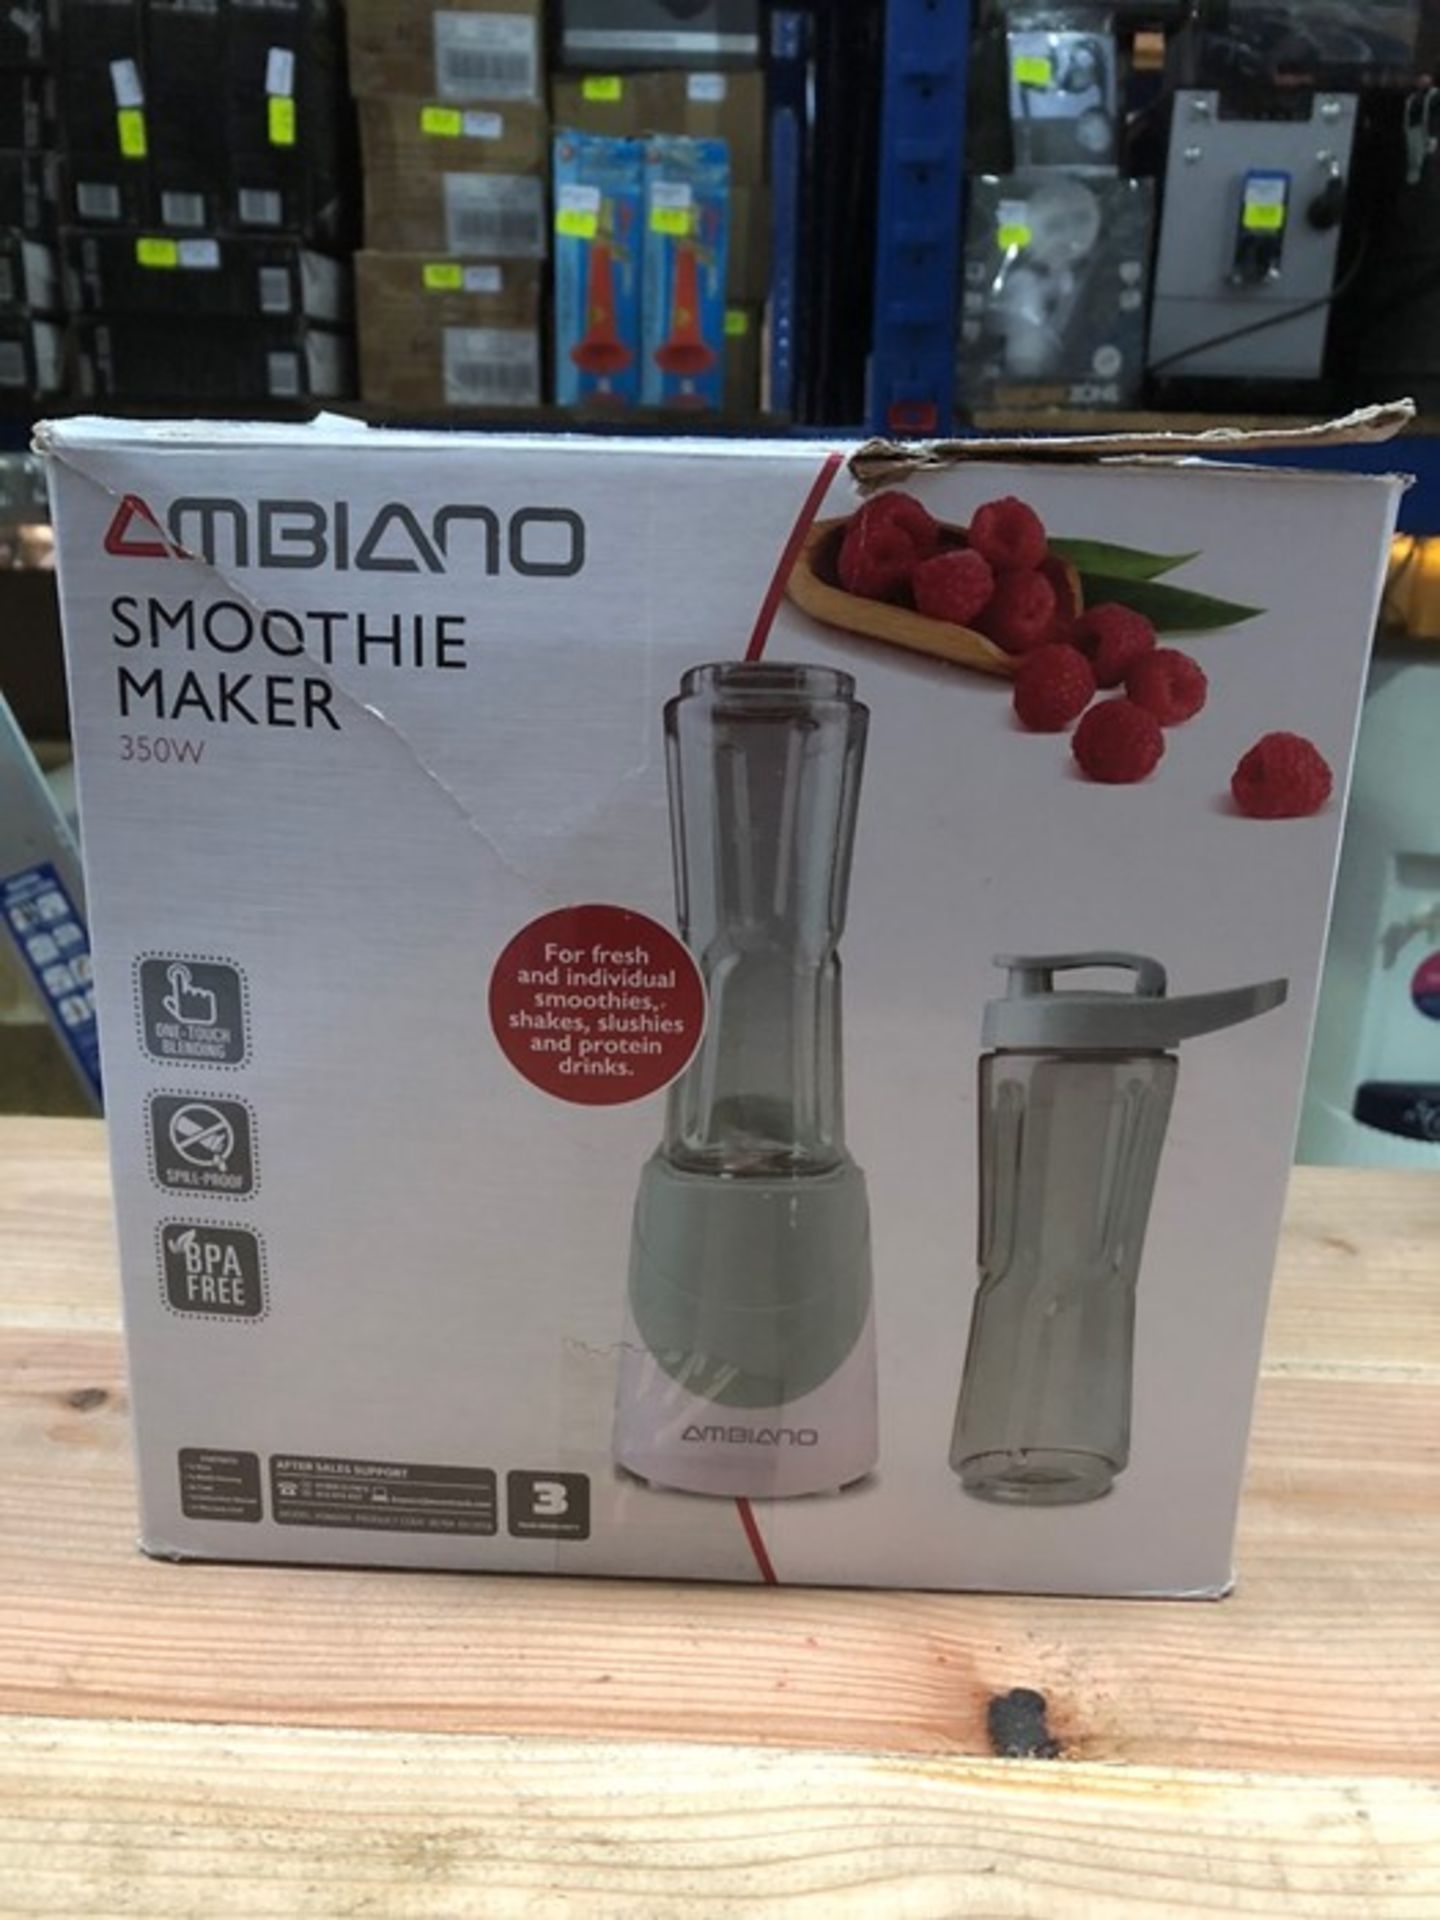 1 BOXED AMBIANO SMOOTHIE MAKER IN GREY / RRP £14.99 (PUBLIC VIEWING AVAILABLE)